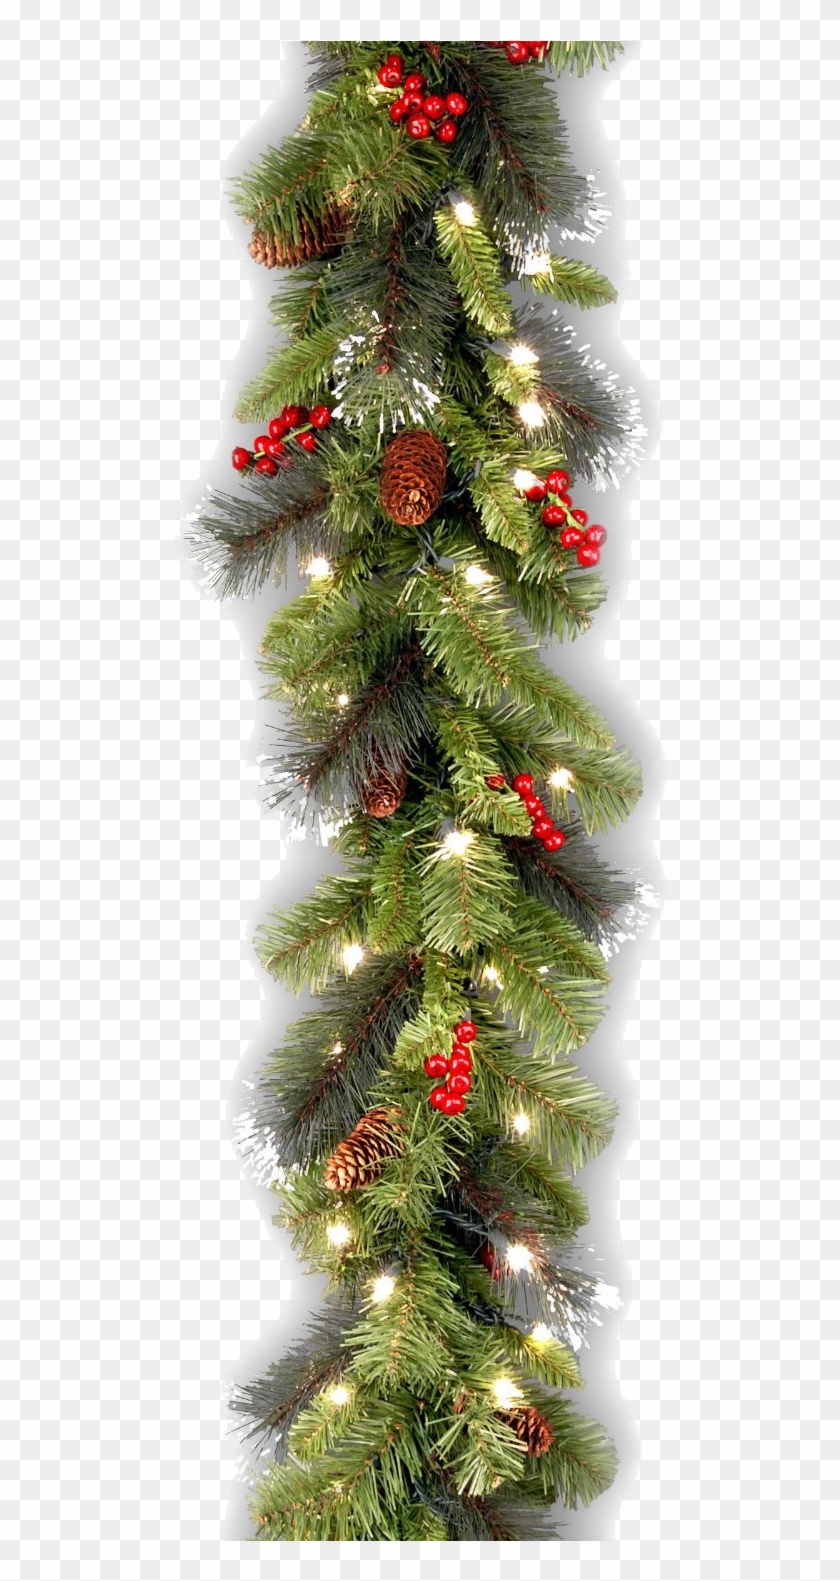 Pngs De Natal - Lighted Christmas Garland Png Clipart